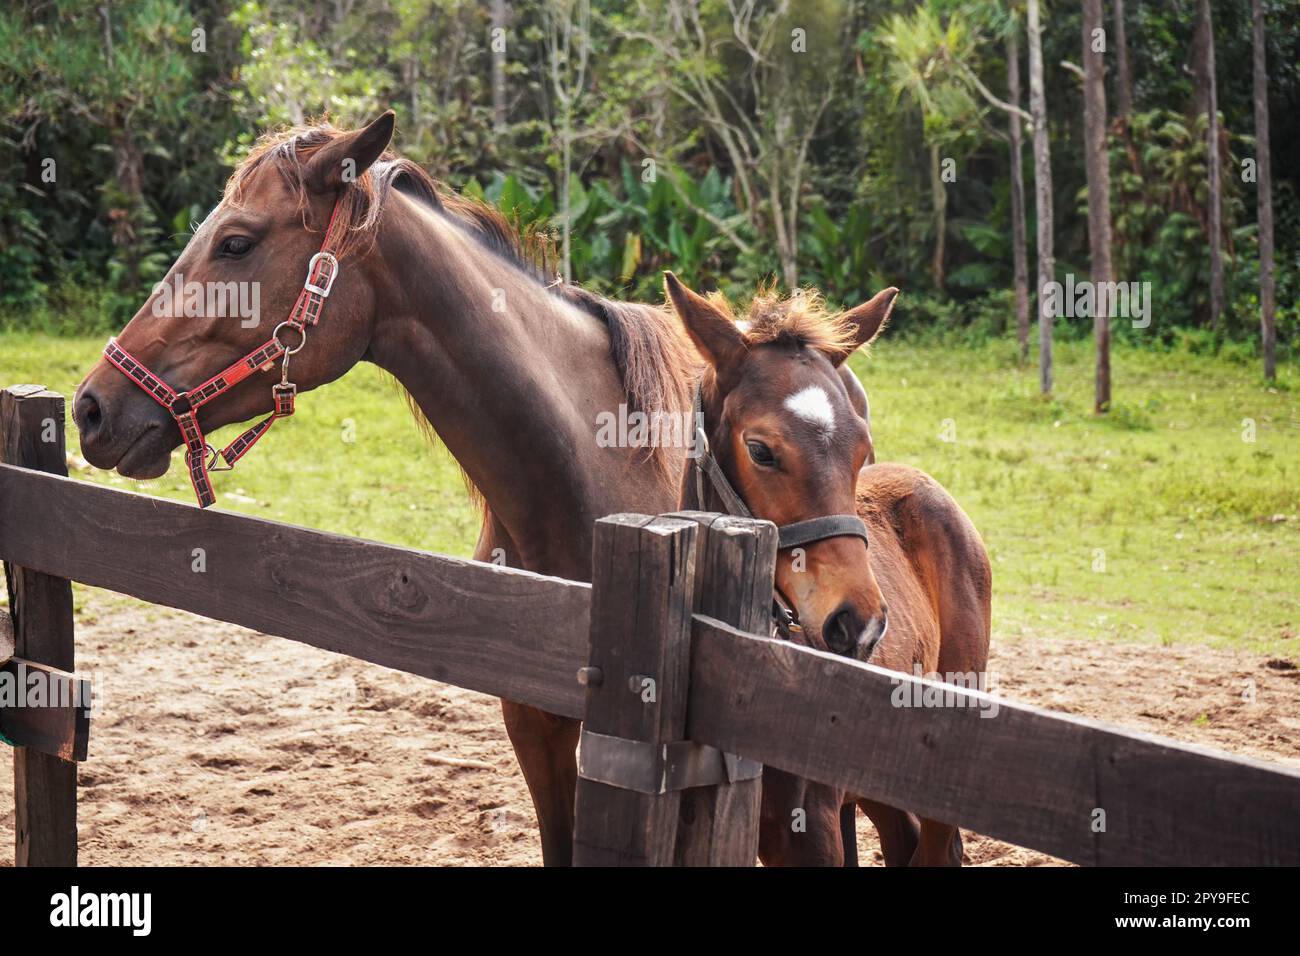 Young brown horse foal and larger one, standing next to wooden fence, blurred African jungle trees background, horseriding in Madagascar Stock Photo